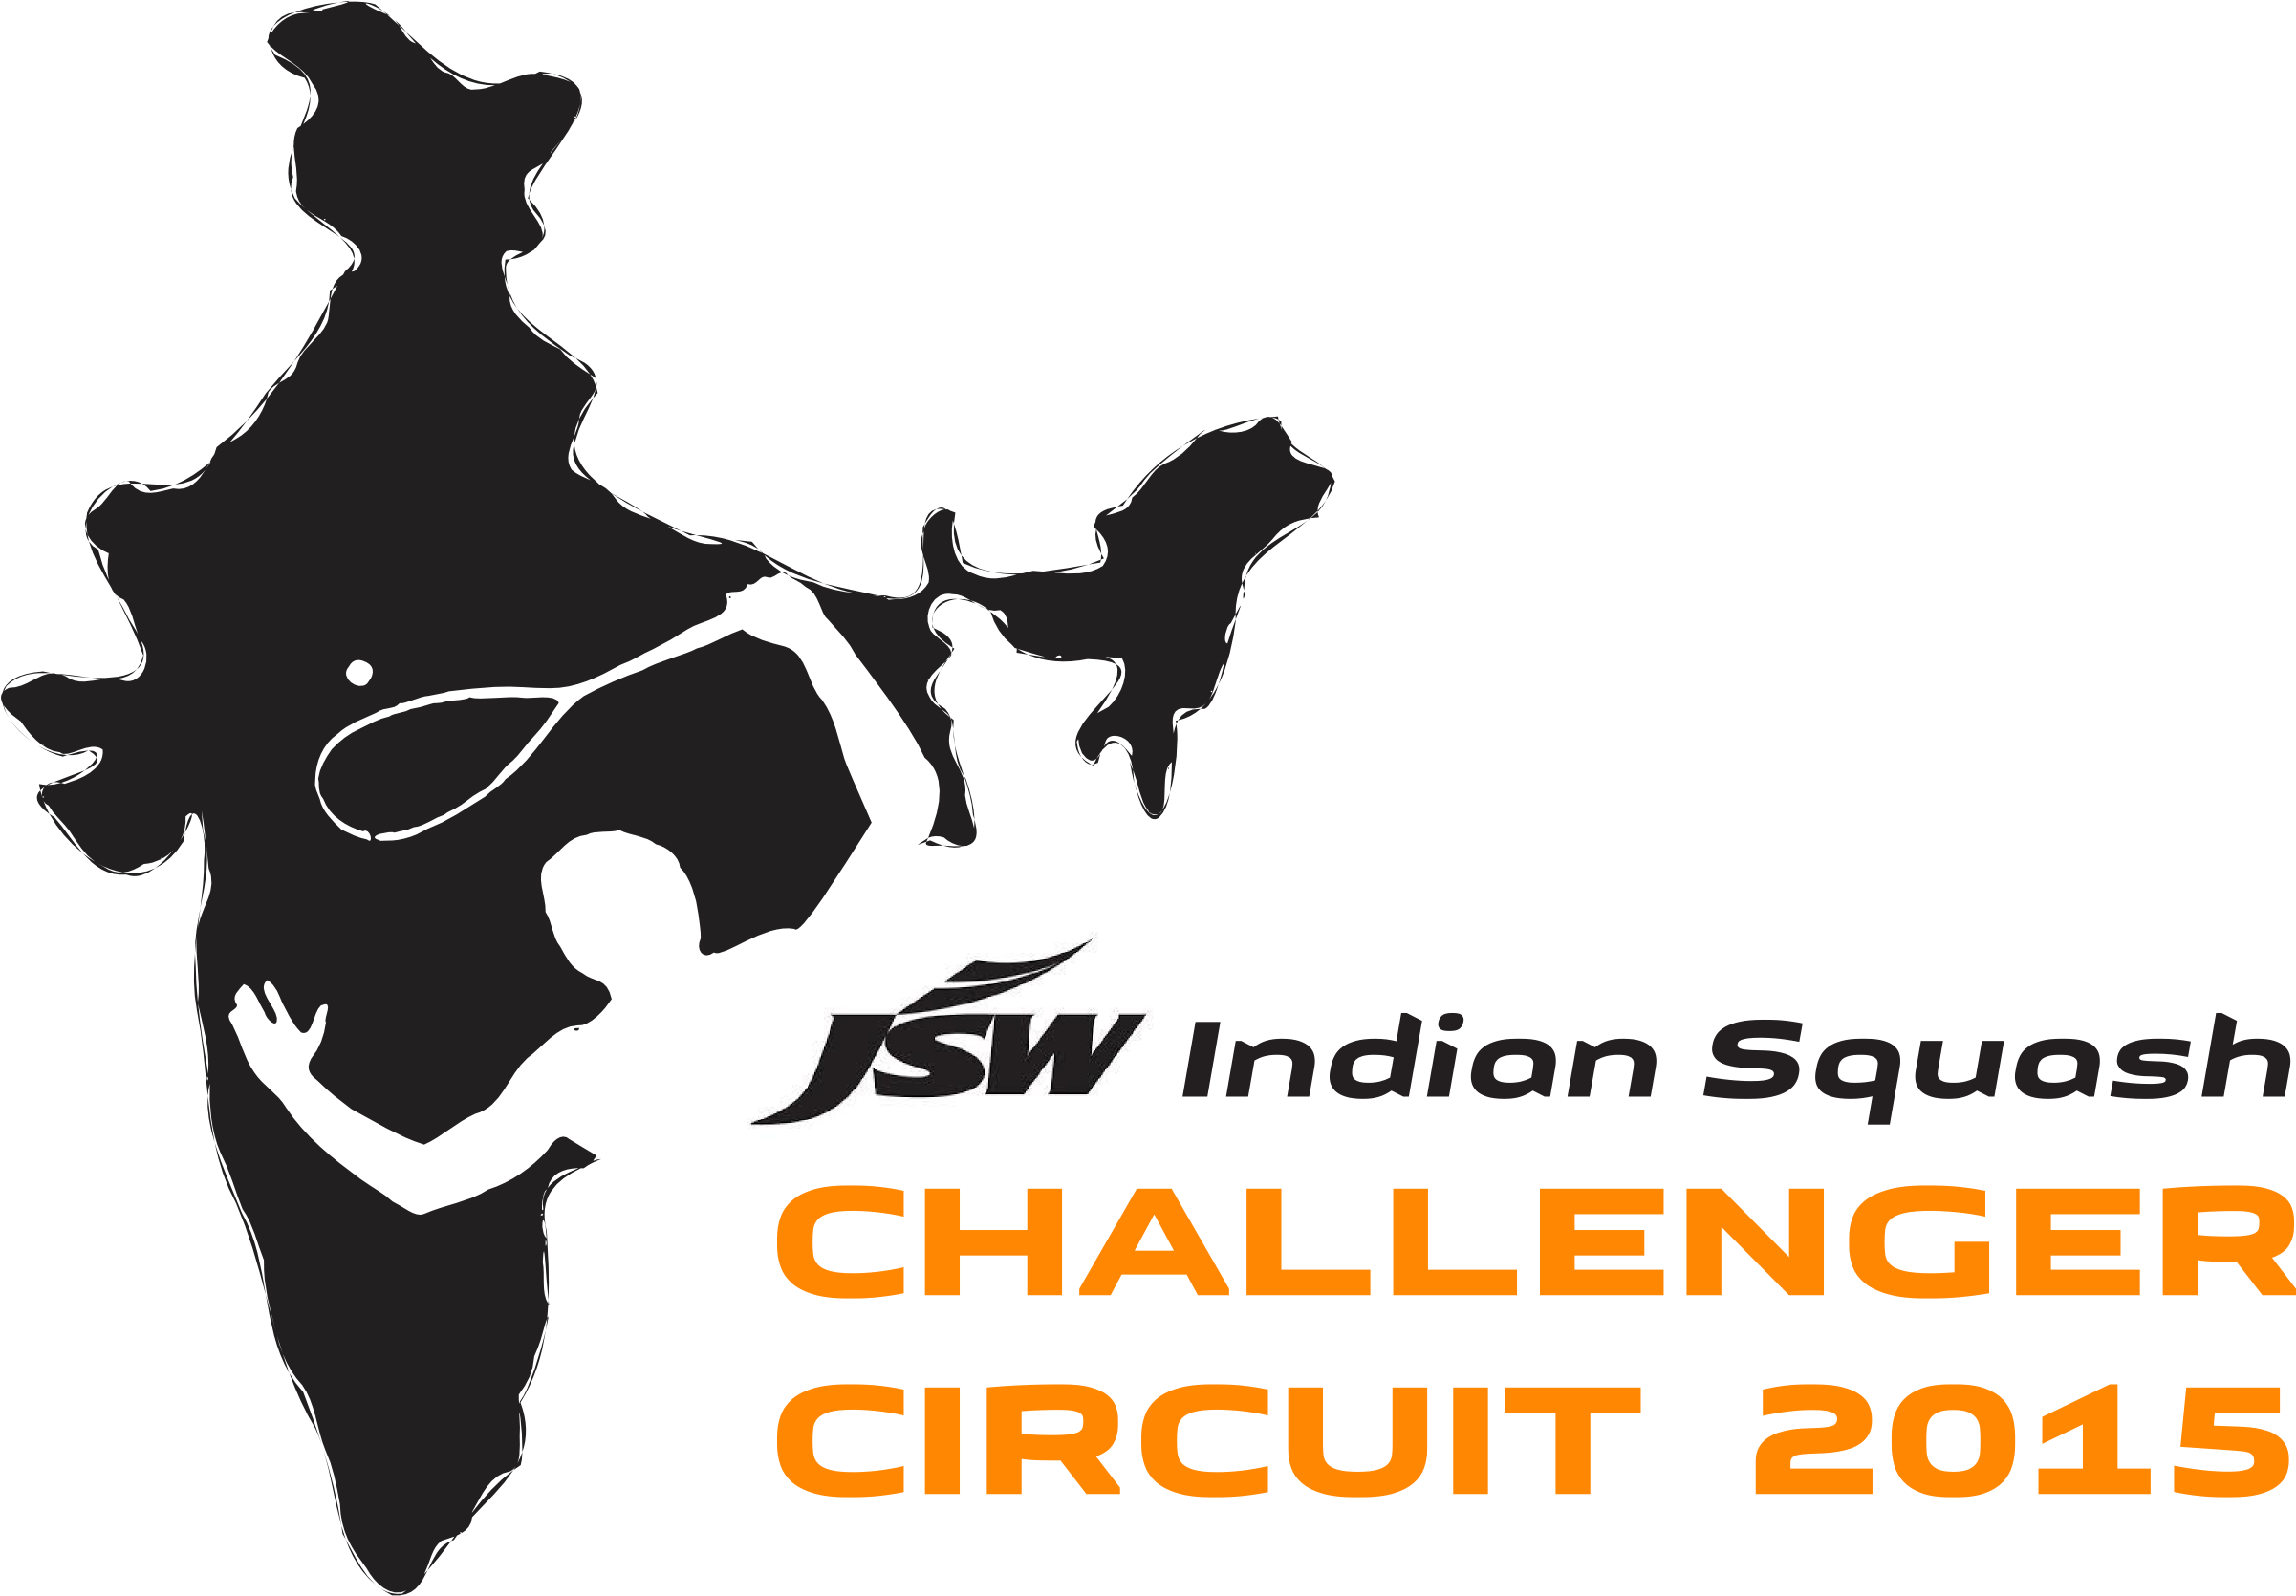 Cci International Jsw Indian Squash Circuit - 10 Most Livable Cities In India (2401x1854), Png Download